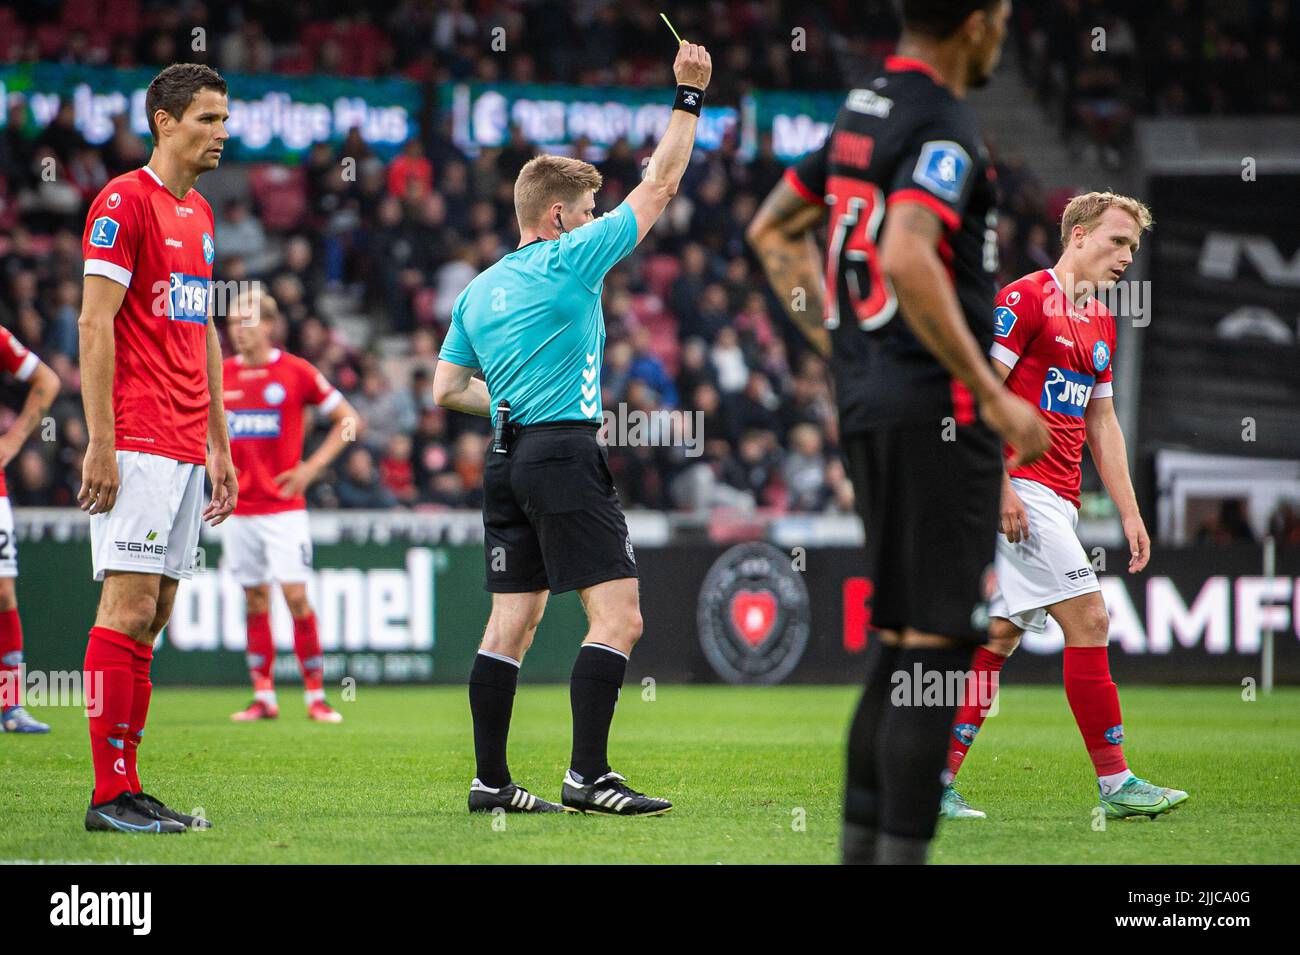 Herning, Denmark. 22nd, July 2022. Referee Jakob Sundberg seen during the 3F Superliga match between FC Midtjylland and Silkeborg IF at MCH Arena in Herning. (Photo credit: Gonzales Photo - Morten Kjaer). Stock Photo